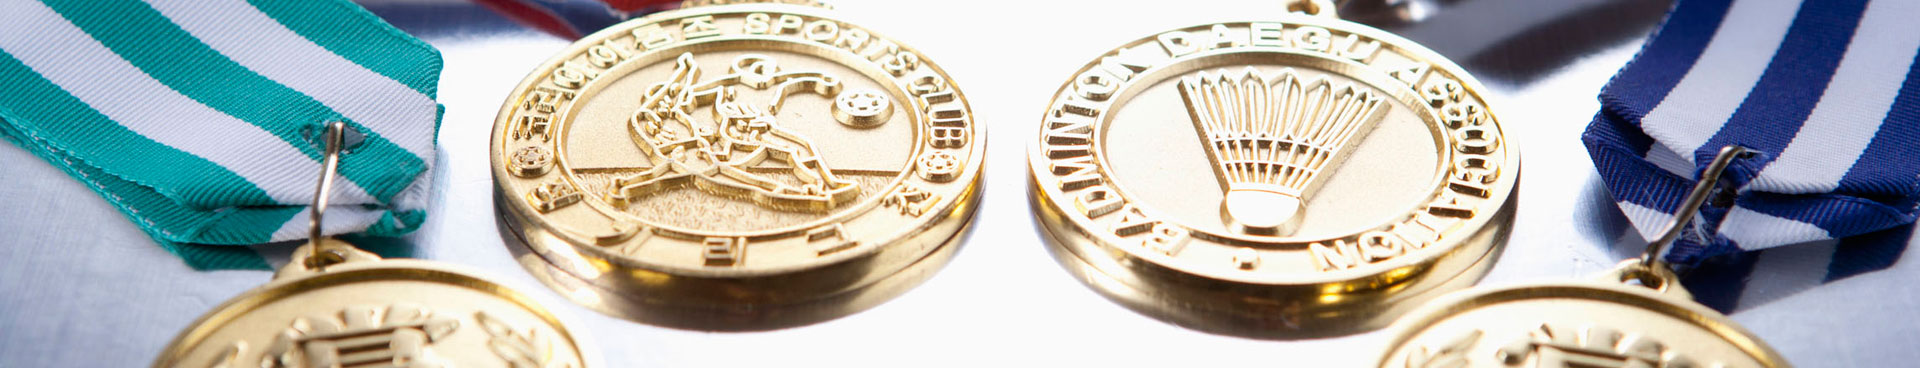 What Can Determine the Price of a Challenge Coin?